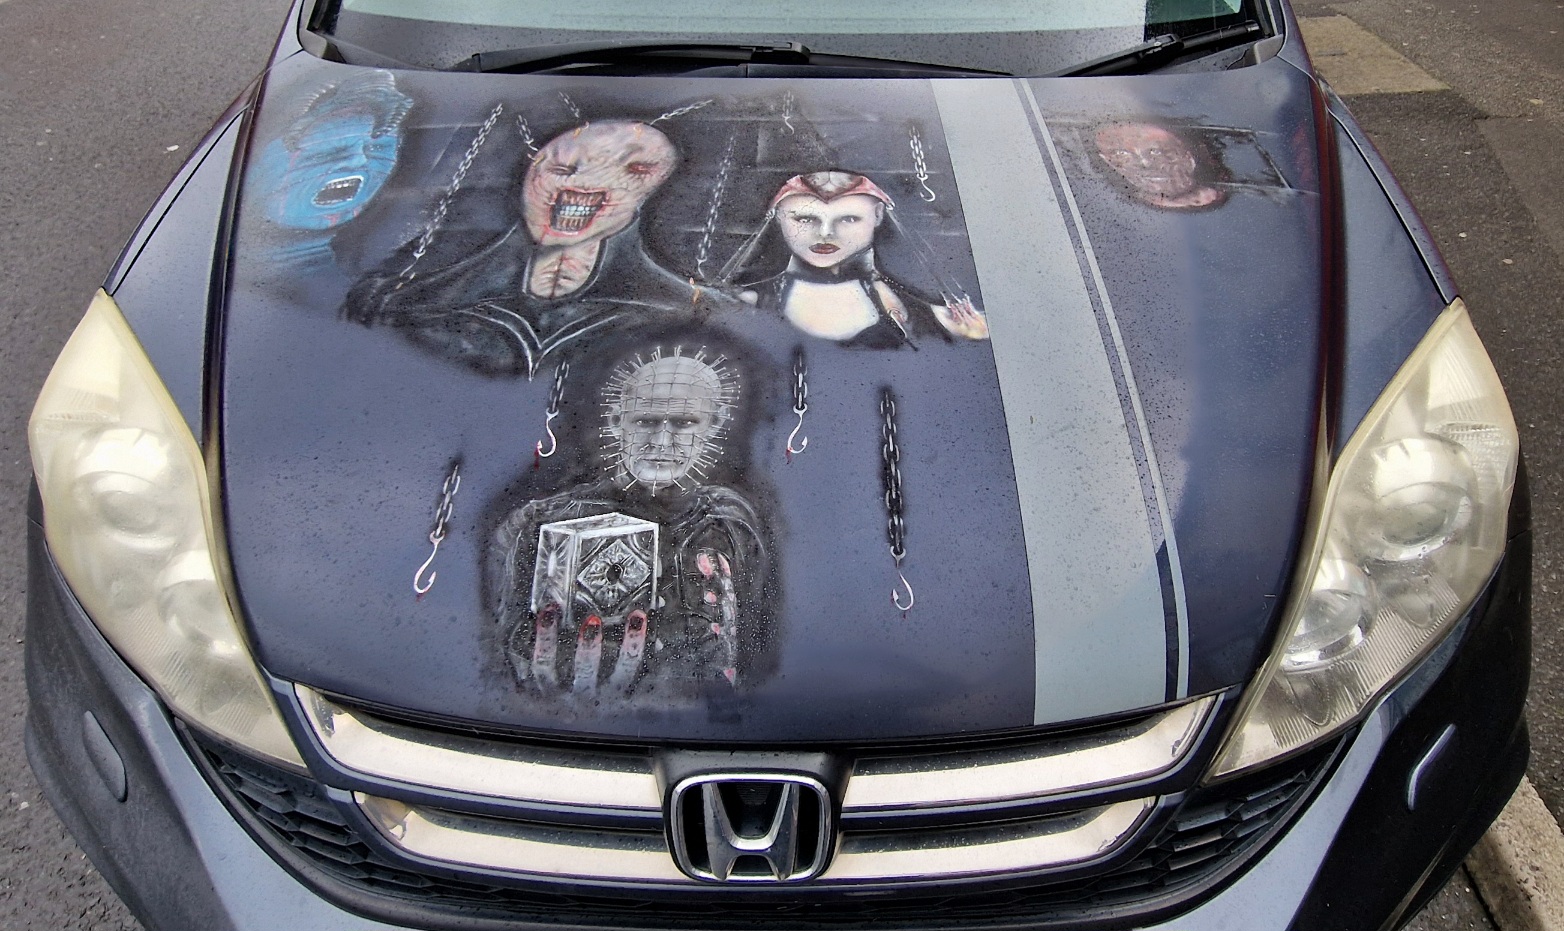 Car with characters from the Hellraiser movies on the bonnet